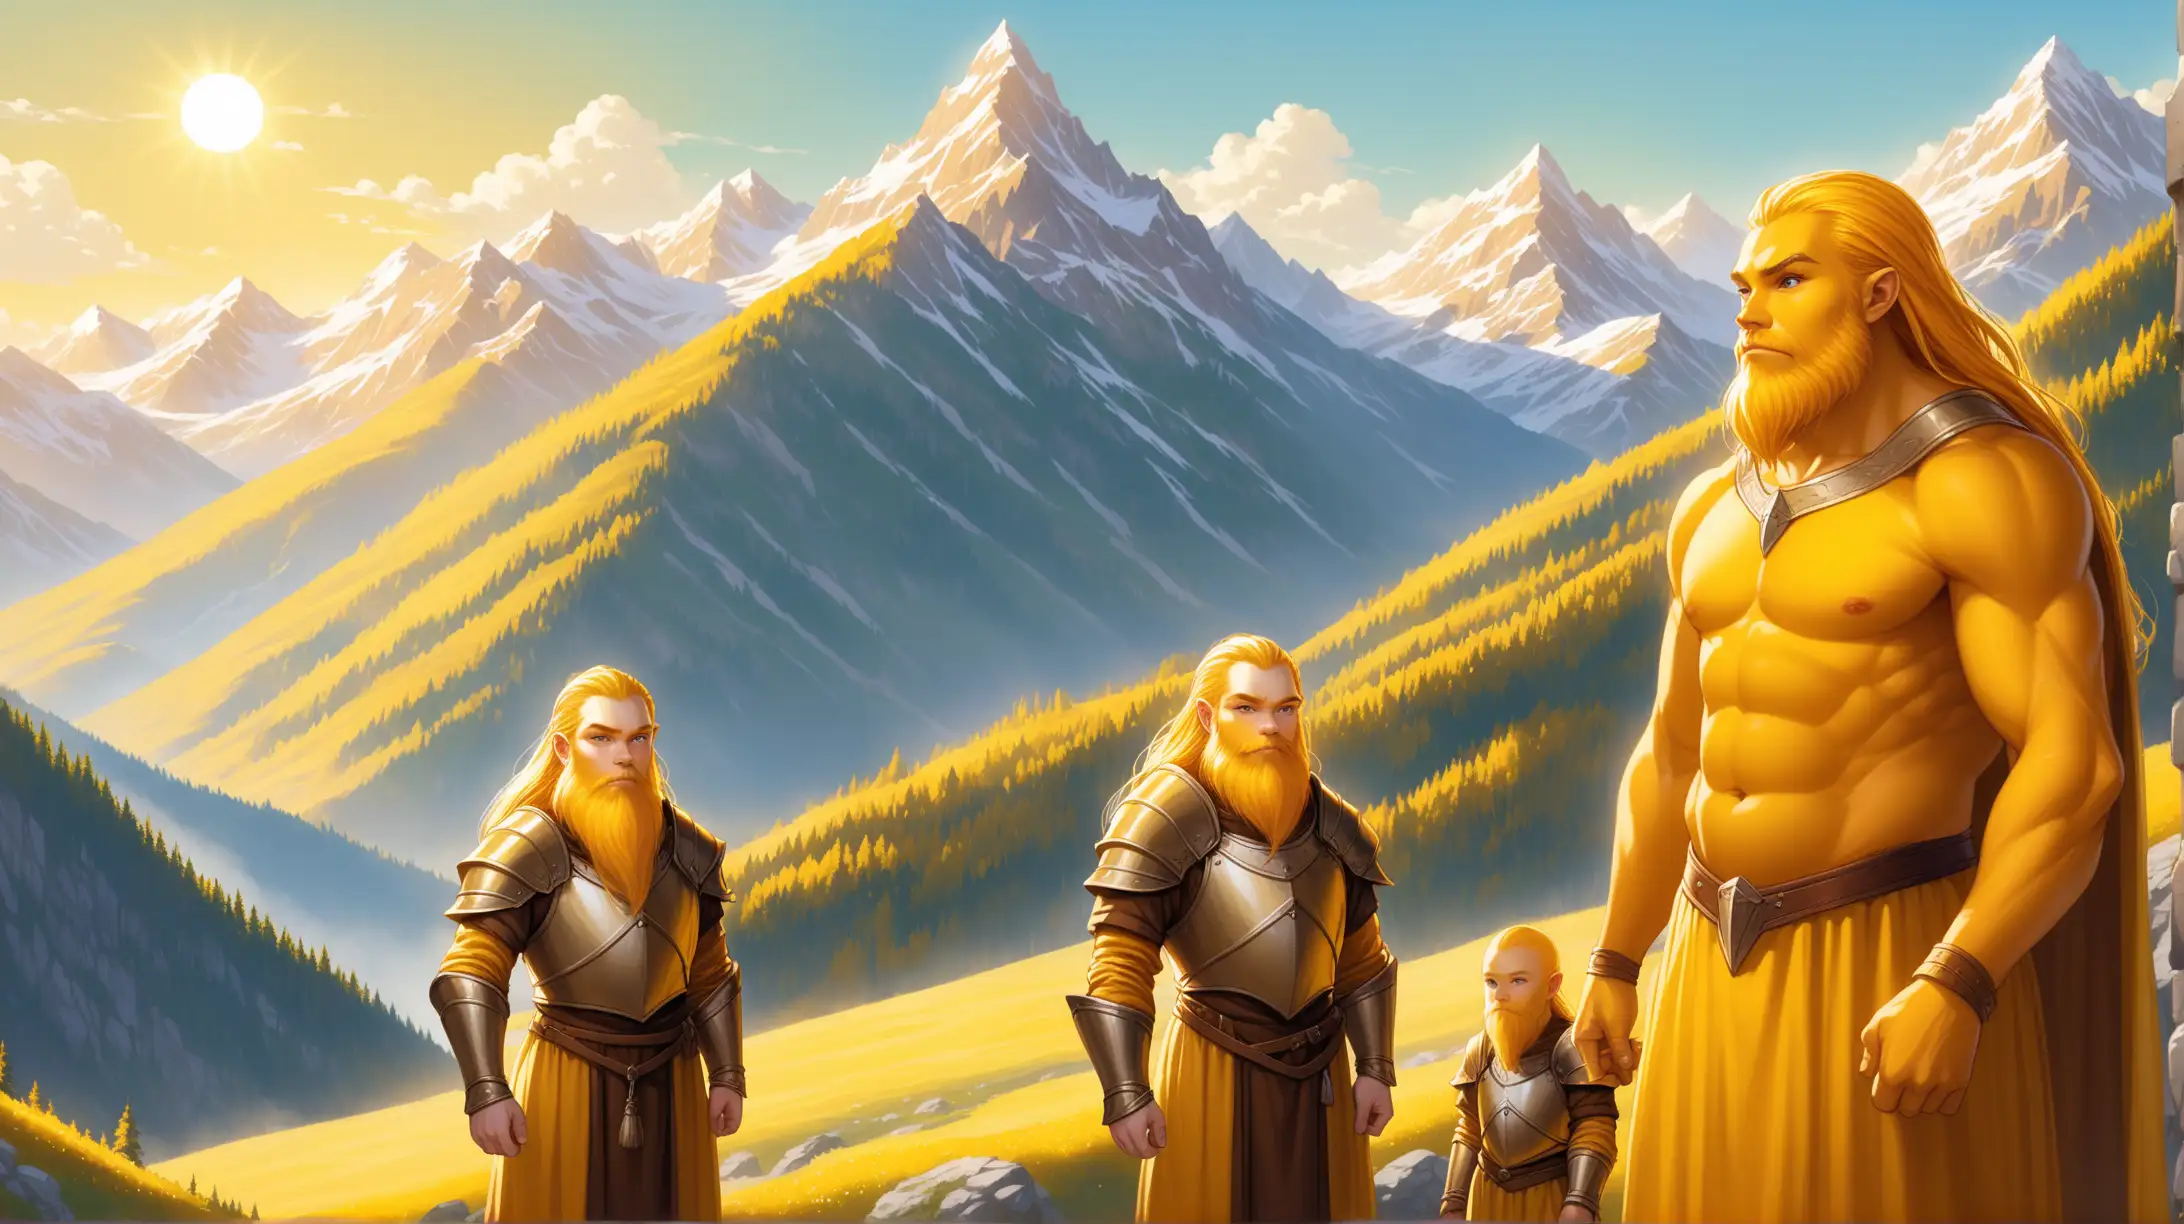 young golden dwarves with yellow skin, golden dwarf men with yellow skin, clean shaved golden women with no beard and yellow skin, sunlit mountain, Medieval fantasy